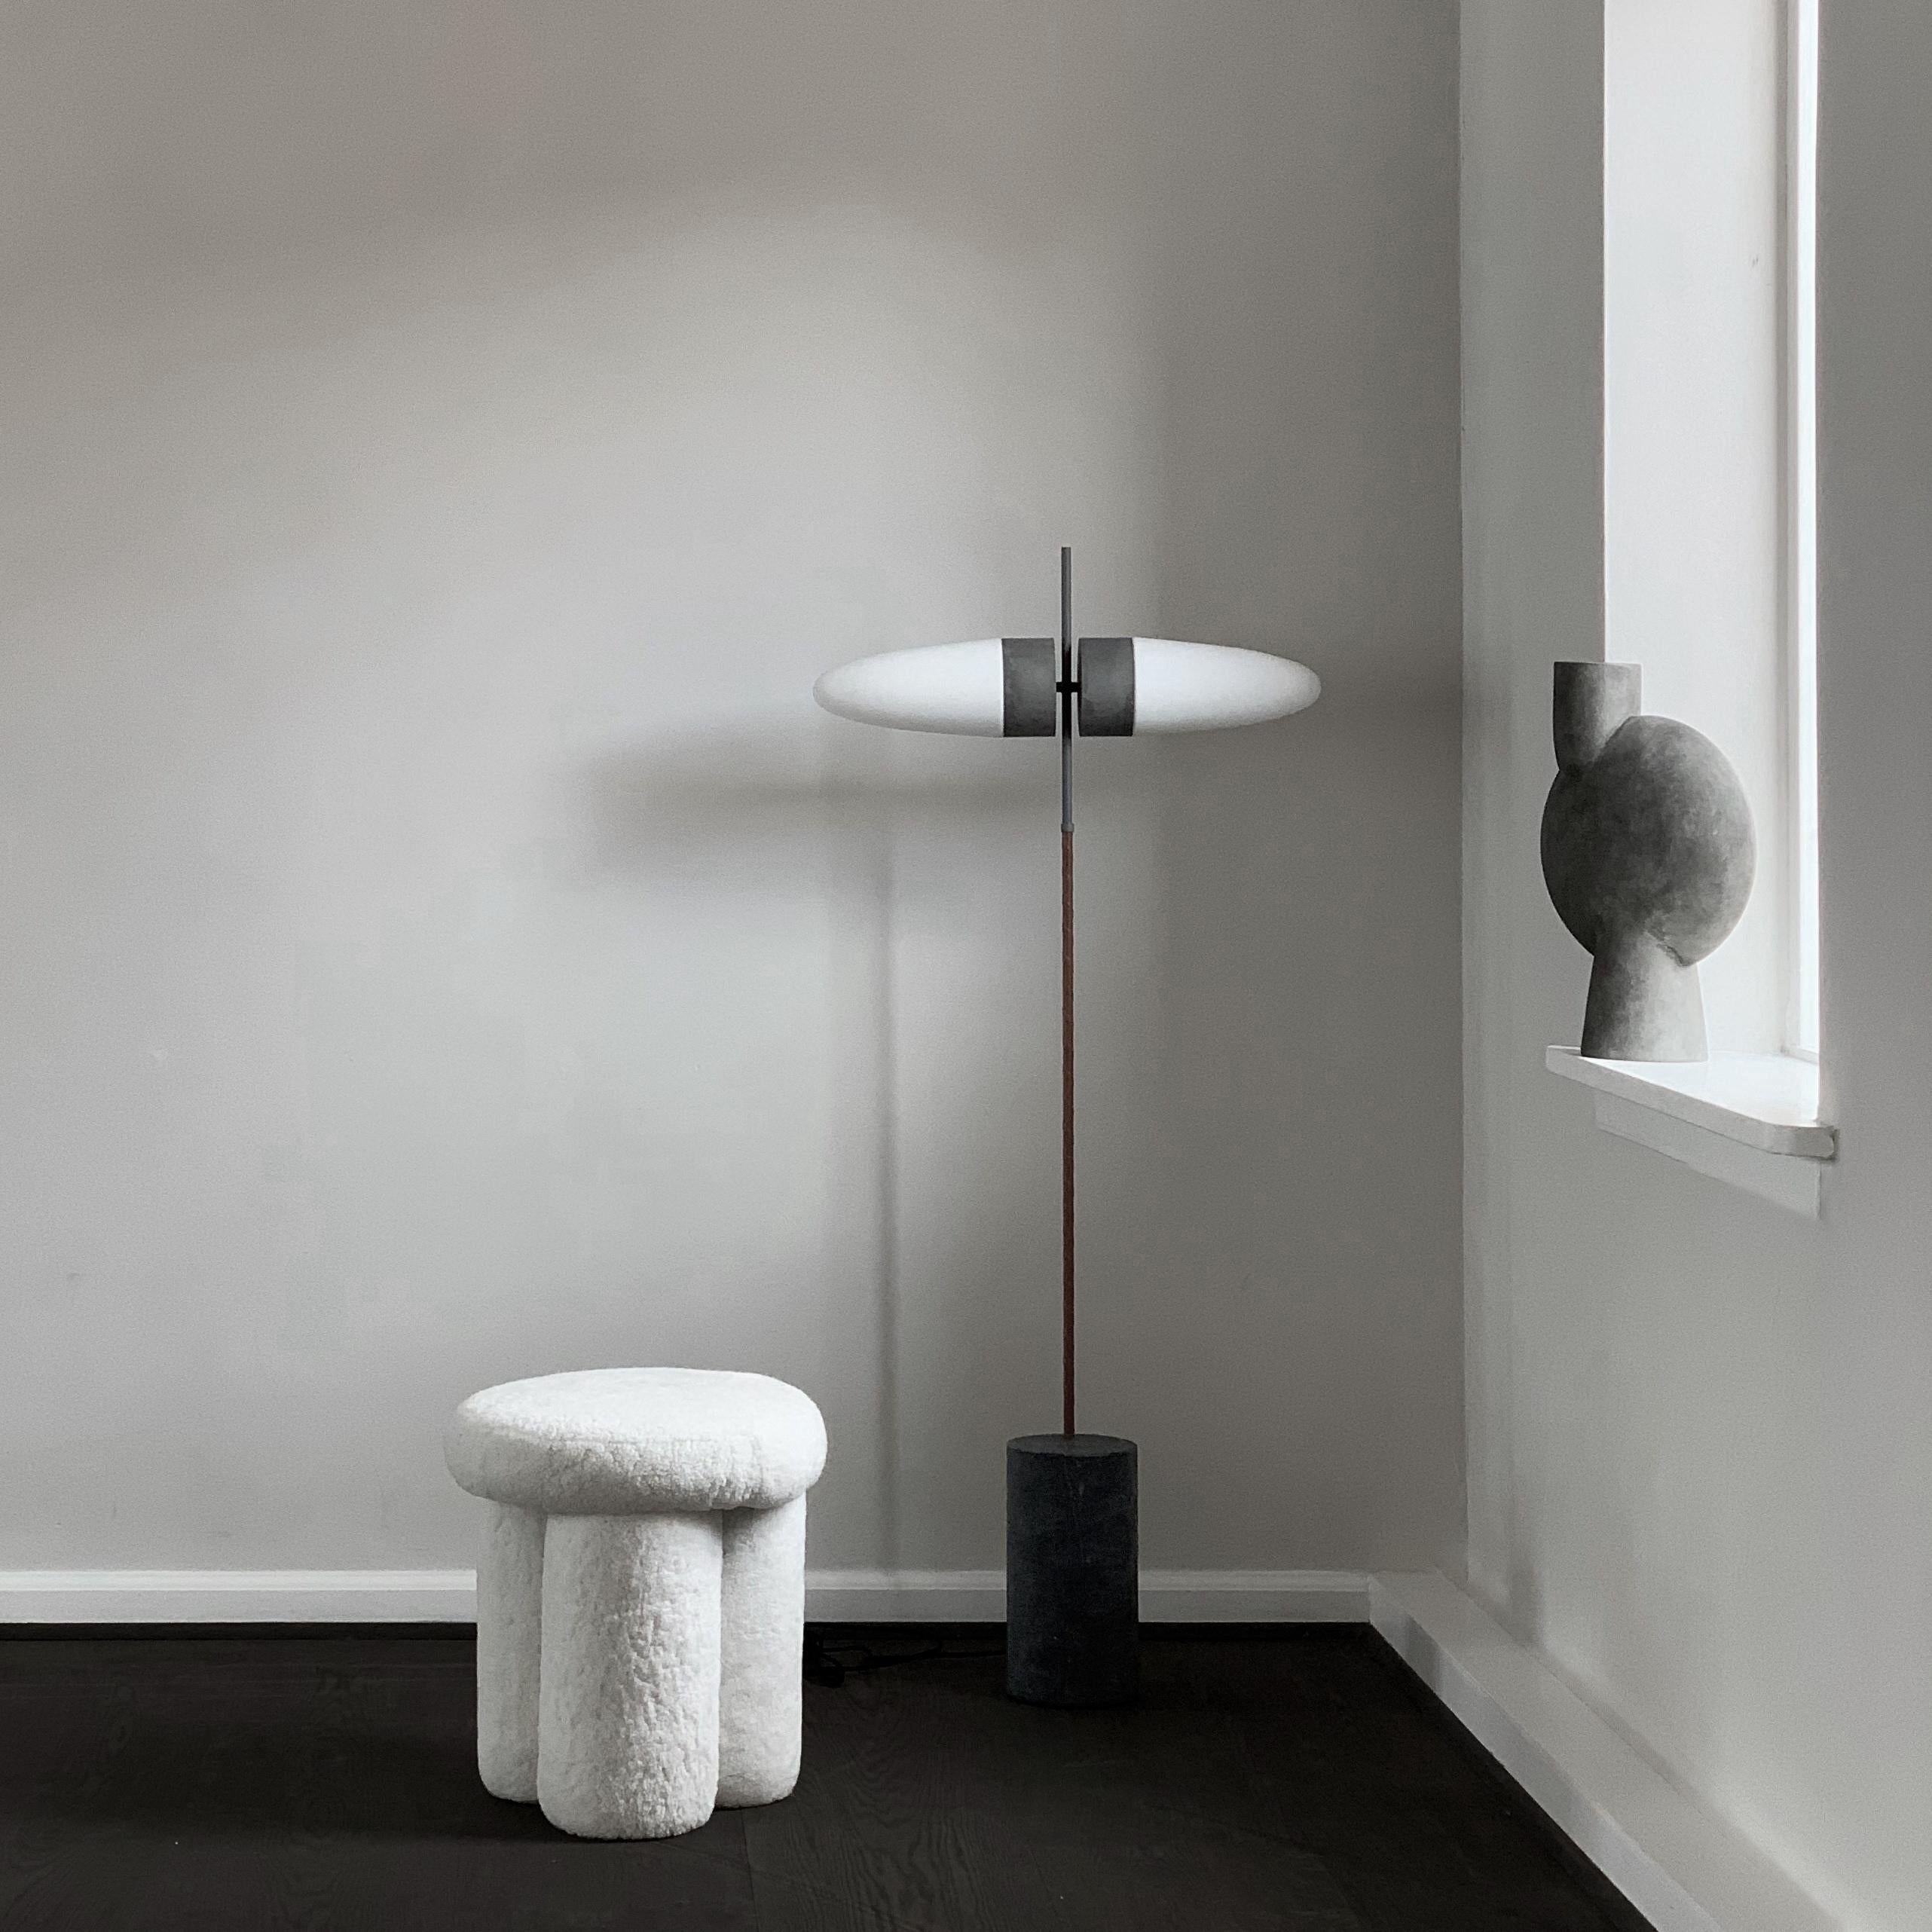 Bull floor lamp by 101 Copenhagen
Designed by Kristian Sofus Hansen & Tommy Hyldahl.
Dimensions: L 65 x W 16 x H 140 cm
Cable length: 200 cm
This product is not wired for USA

Materials: metal: aluminum / oxidized
Opal glass / white
Leather /